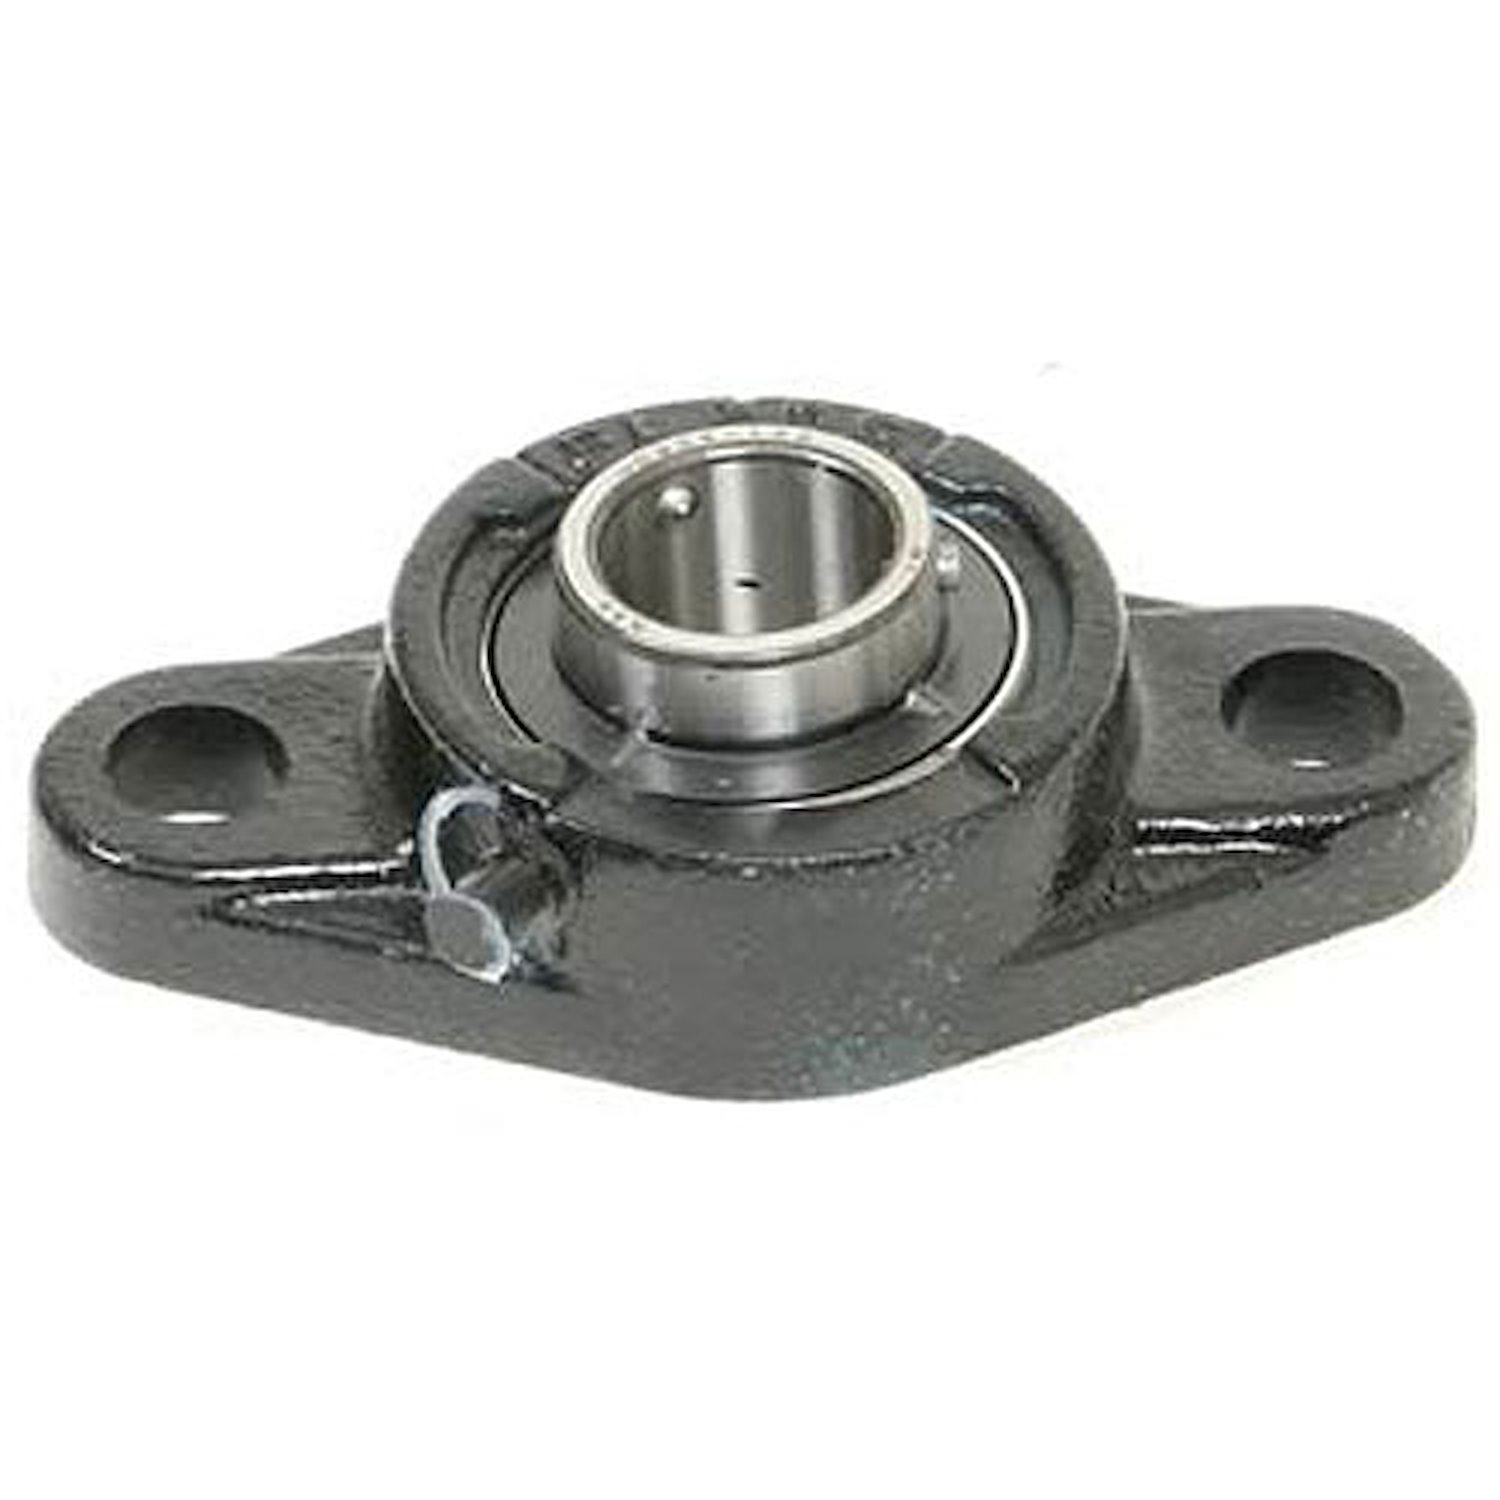 Sector Shaft Bearing Must use with 151-1302010 Shaft Bolt